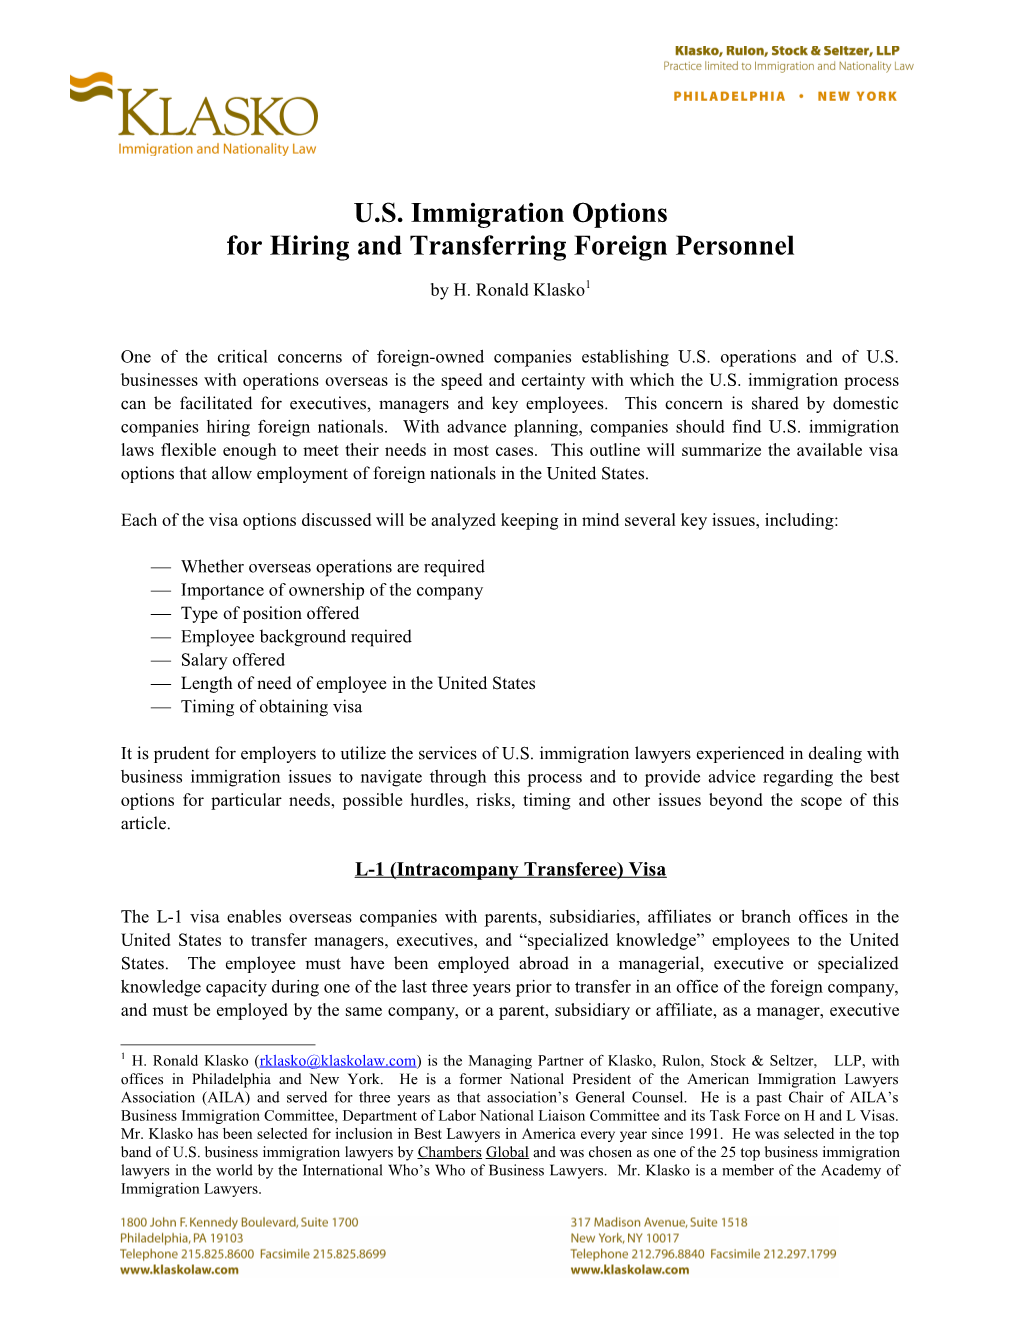 HRK/Article/ U.S. Immigration Options for Hiring and (00567258)